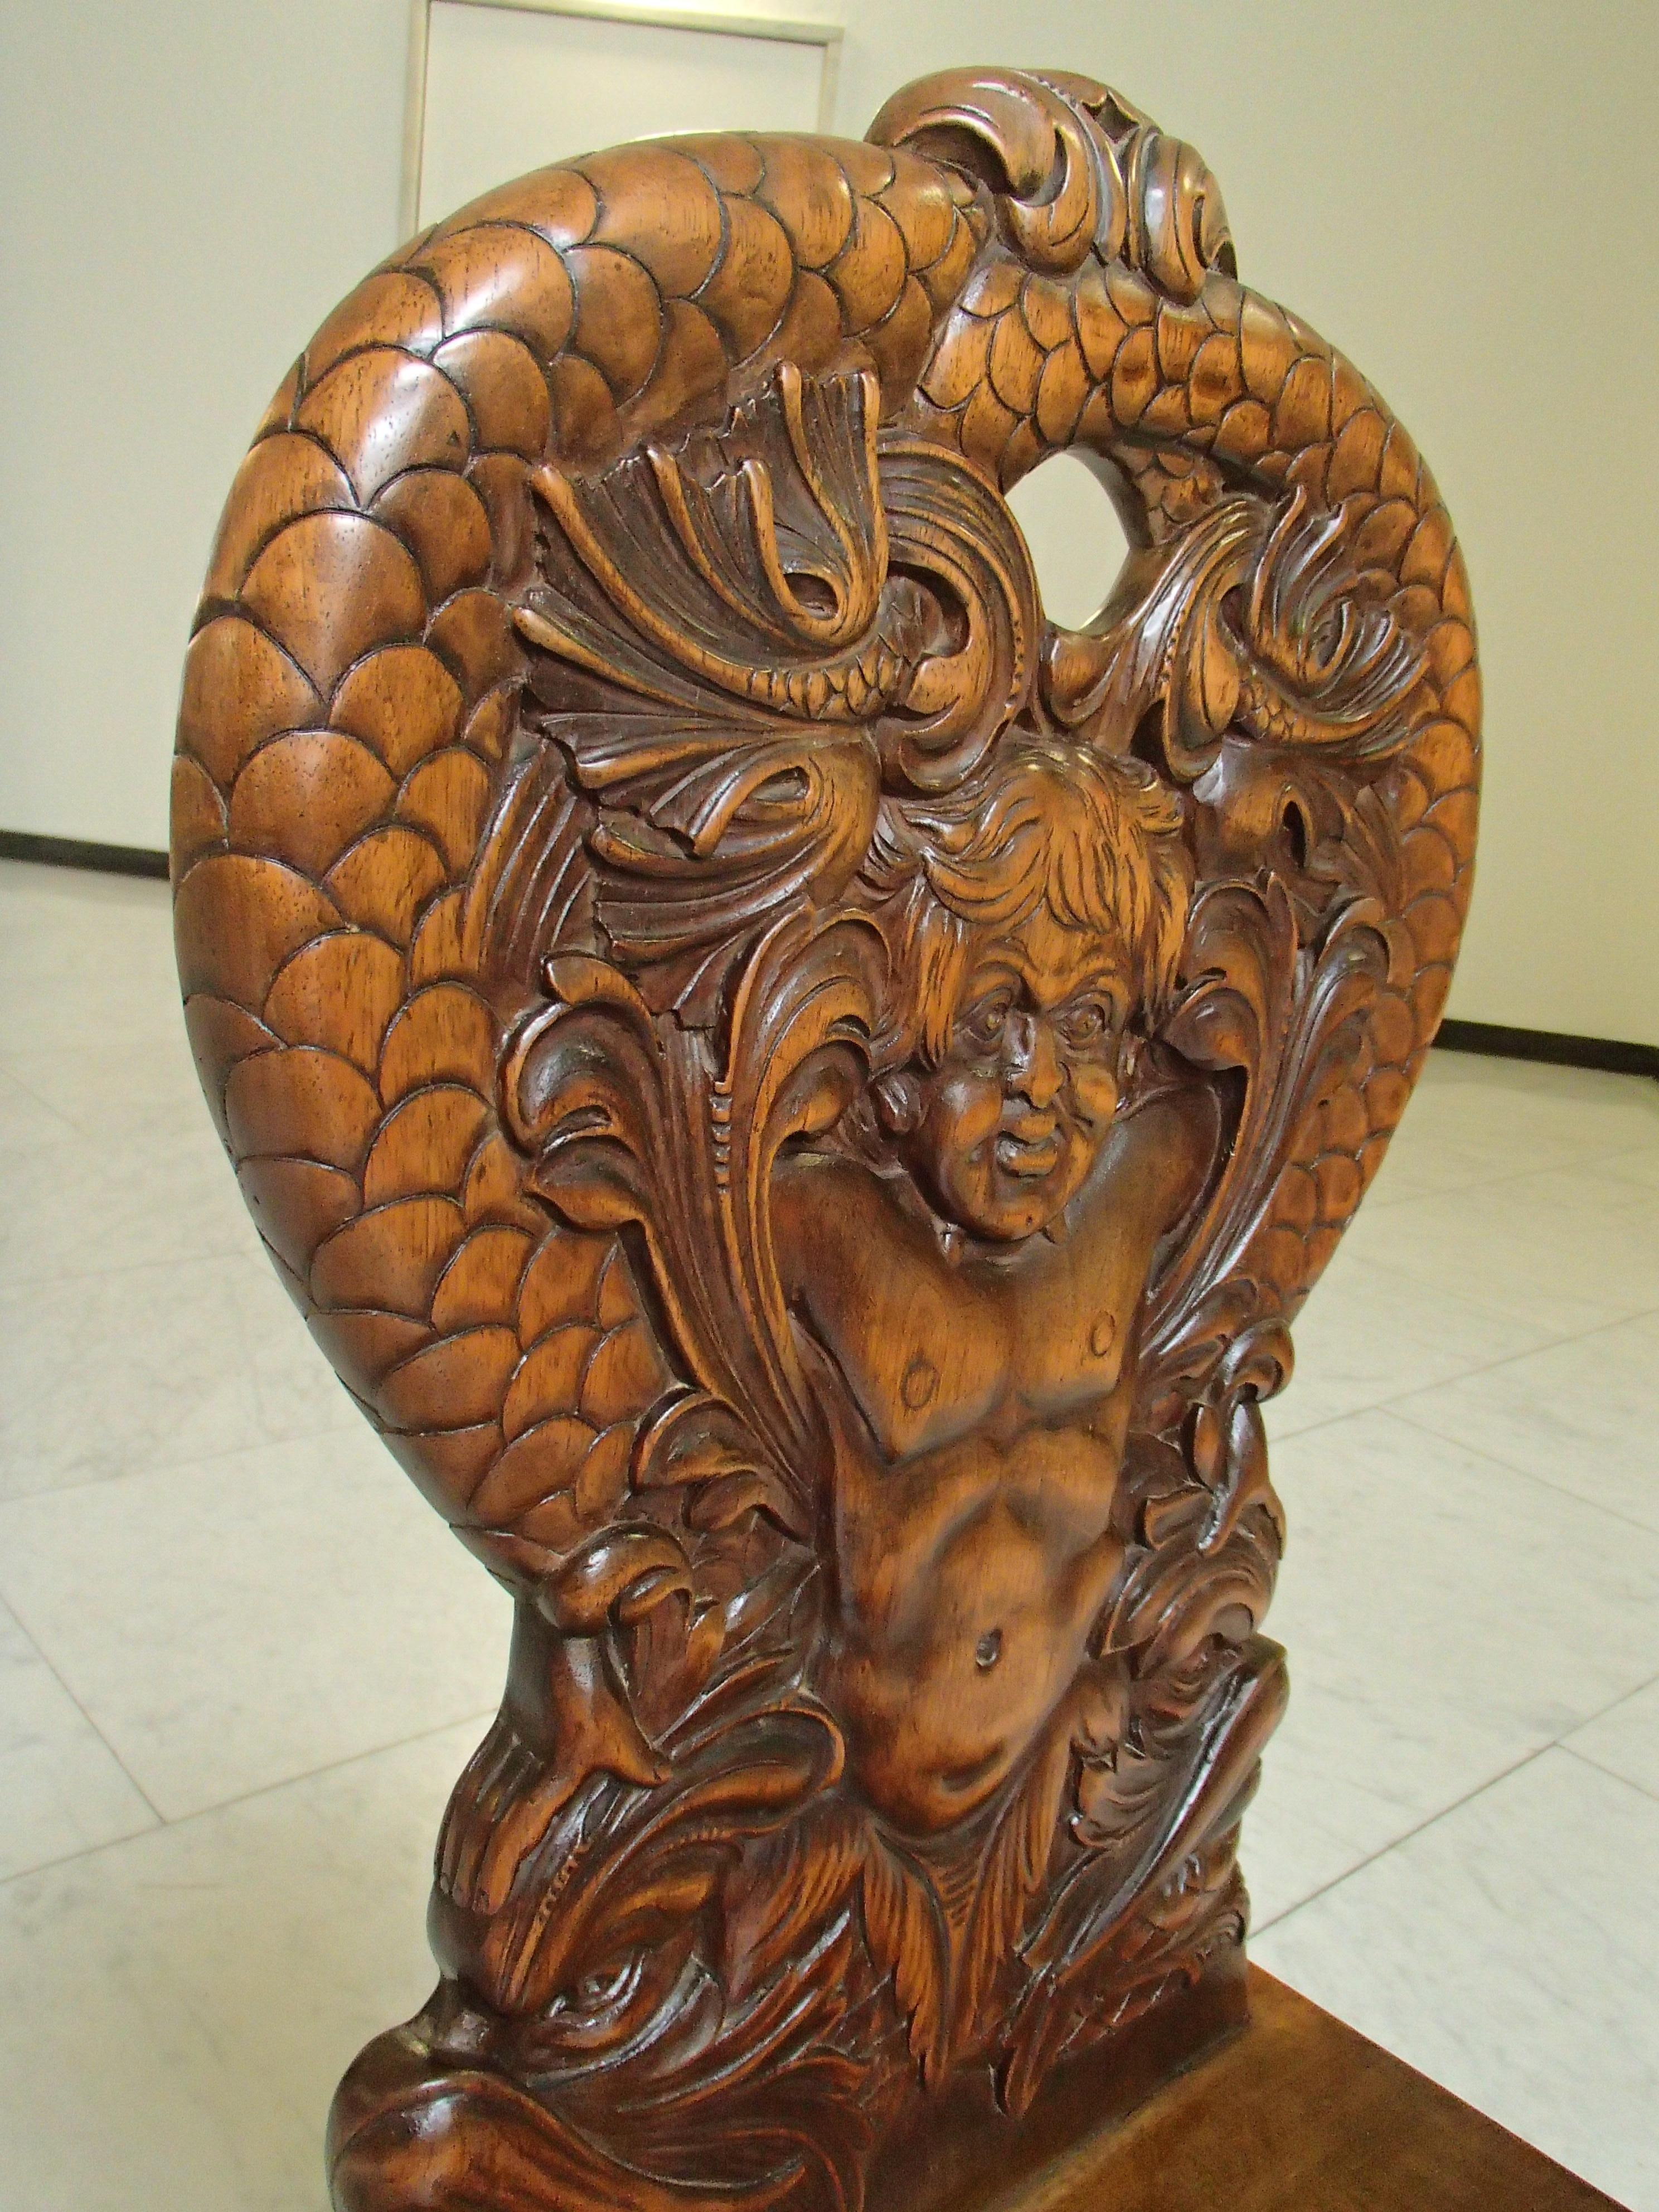 Pair of Brutalist Wooden Chairs Carved with Fabulous Creatures - Dragons 6